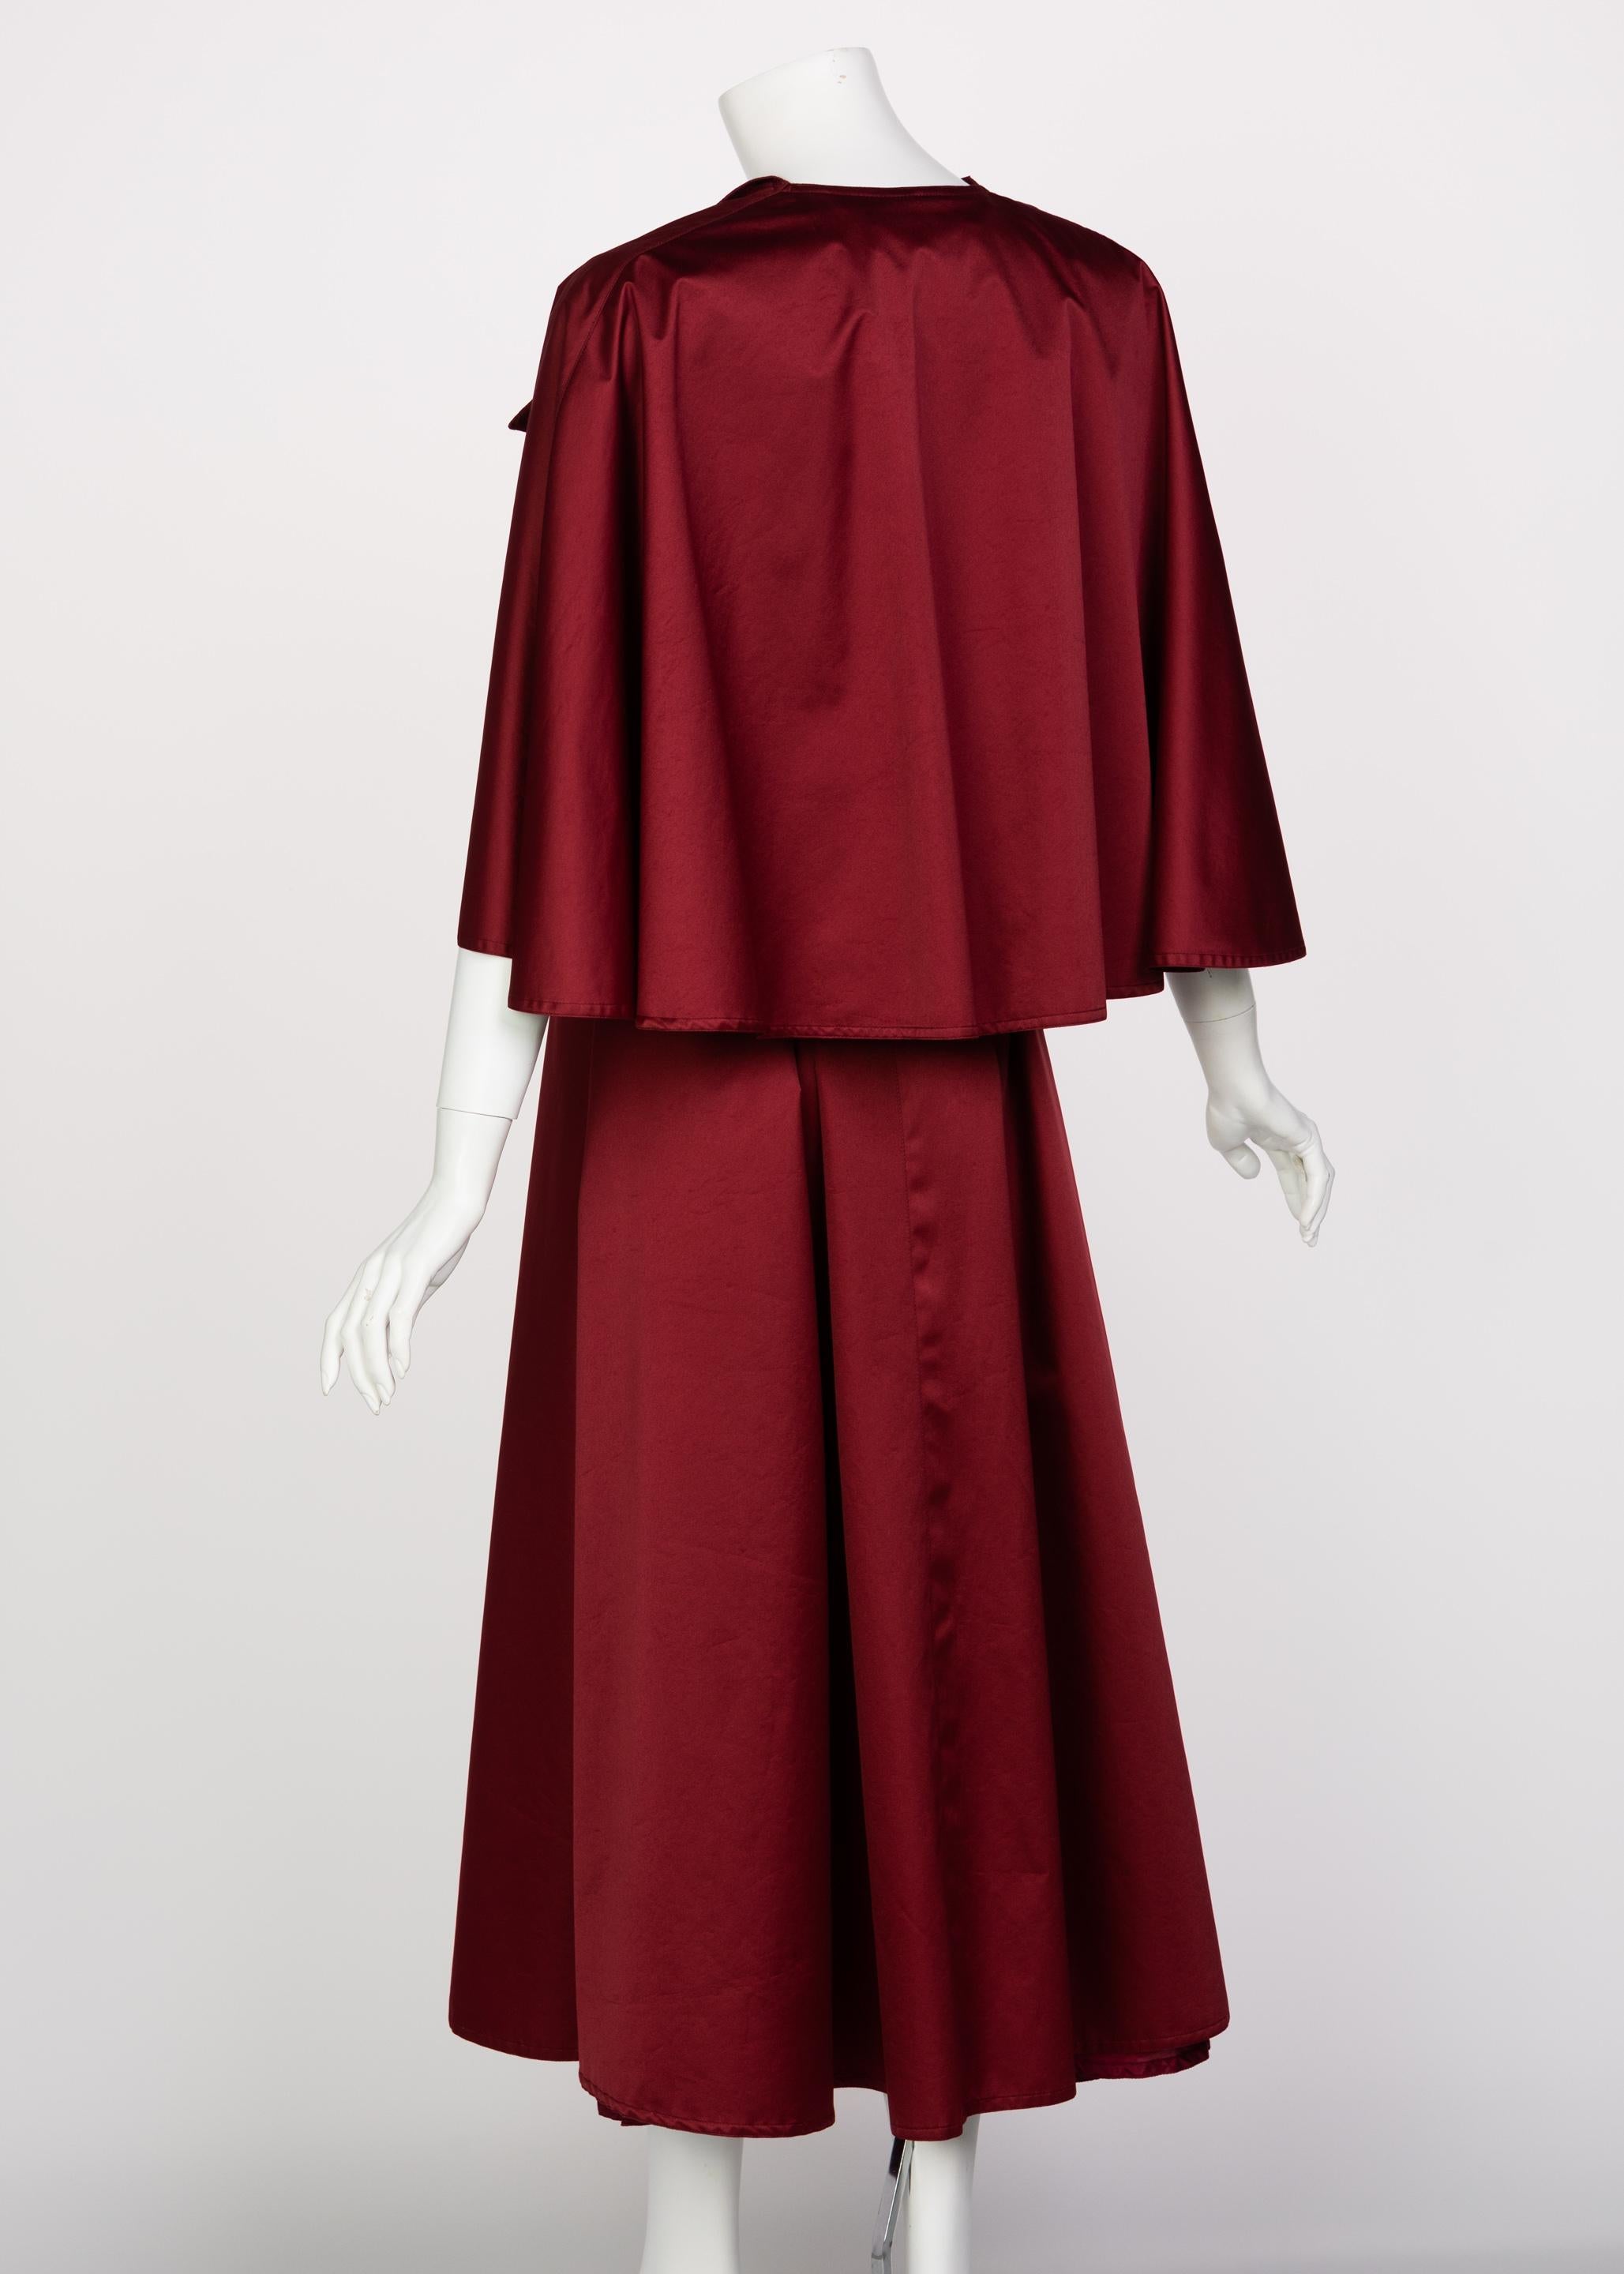 Chloé karl Lagerfeld Bordeaux Gabardine Belted Cape Trench Coat, 1980s In Good Condition For Sale In Boca Raton, FL